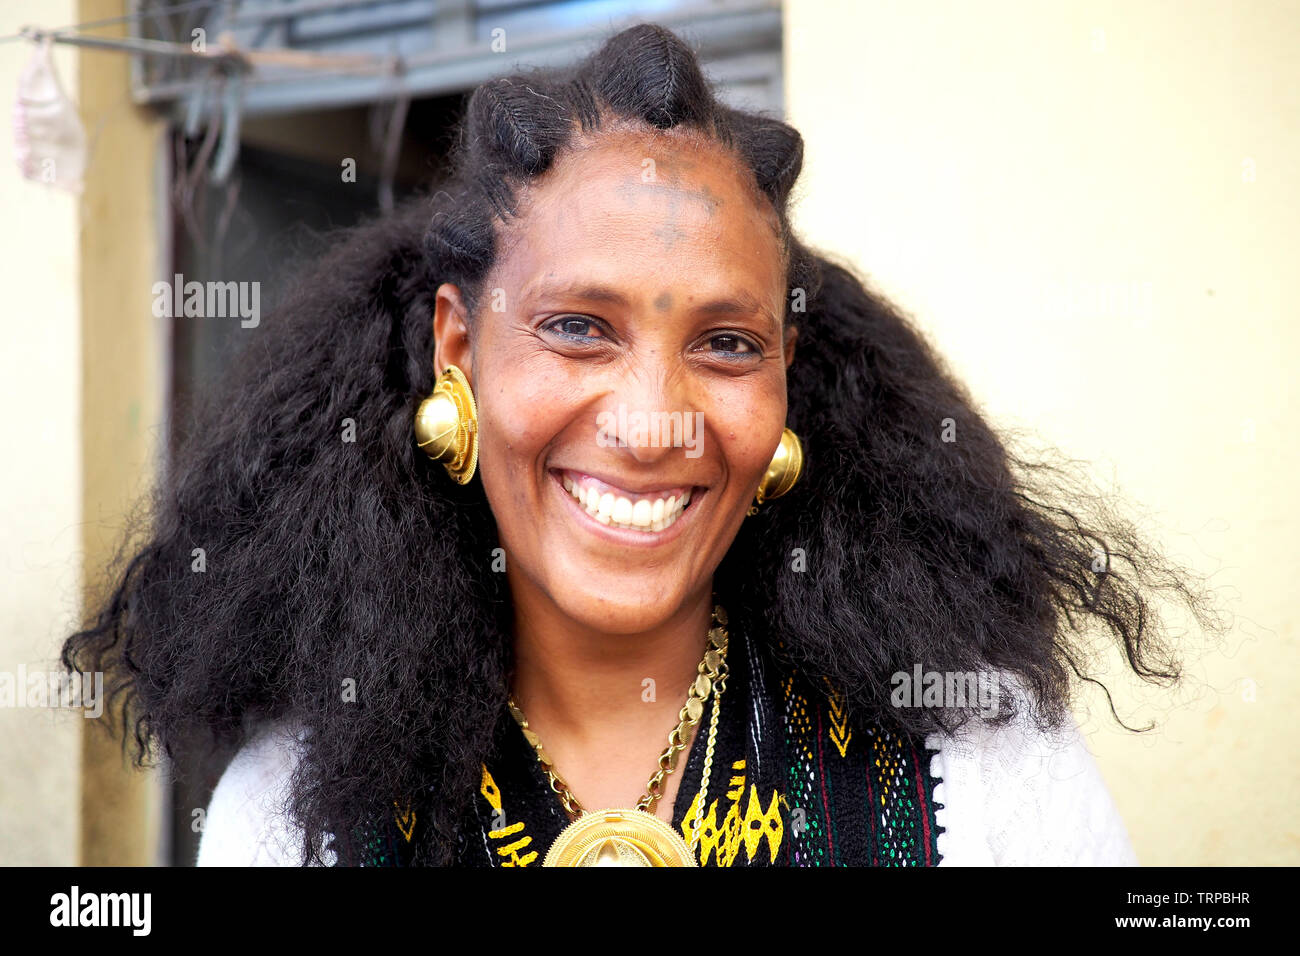 Adigrat, Ethiopia - 6 June 2019 : Ethiopian Irob woman in traditional dress, with gold earings and necklace. Stock Photo